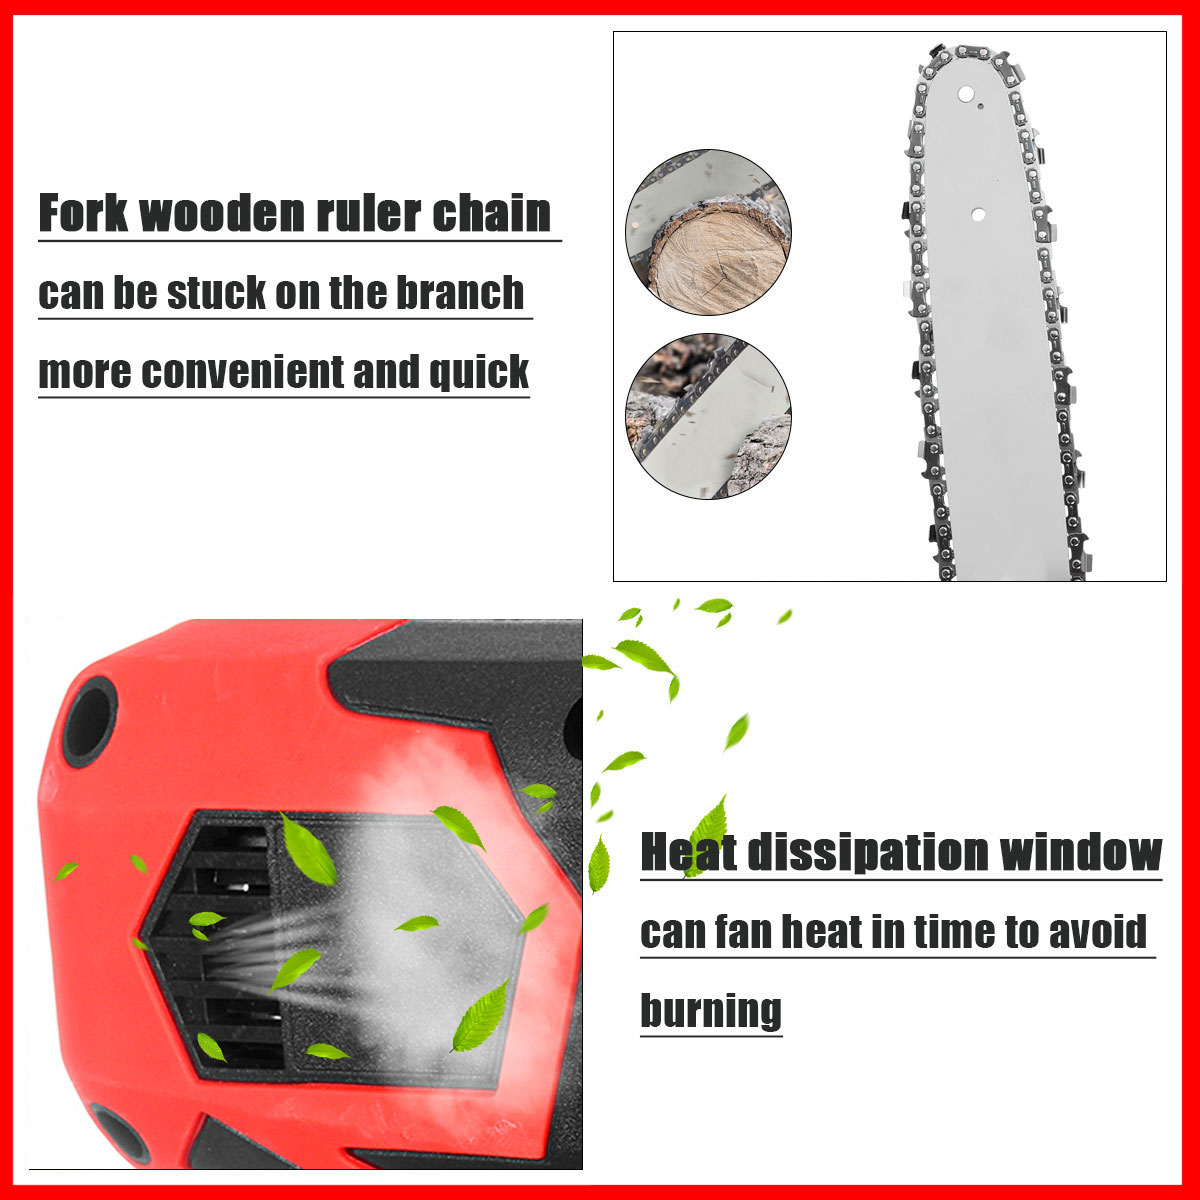 8-Inch-Cordless-Electric-Chain-Saw-288VF--Brushless-Motor-Power-Tools-Chainsaw-1854536-4